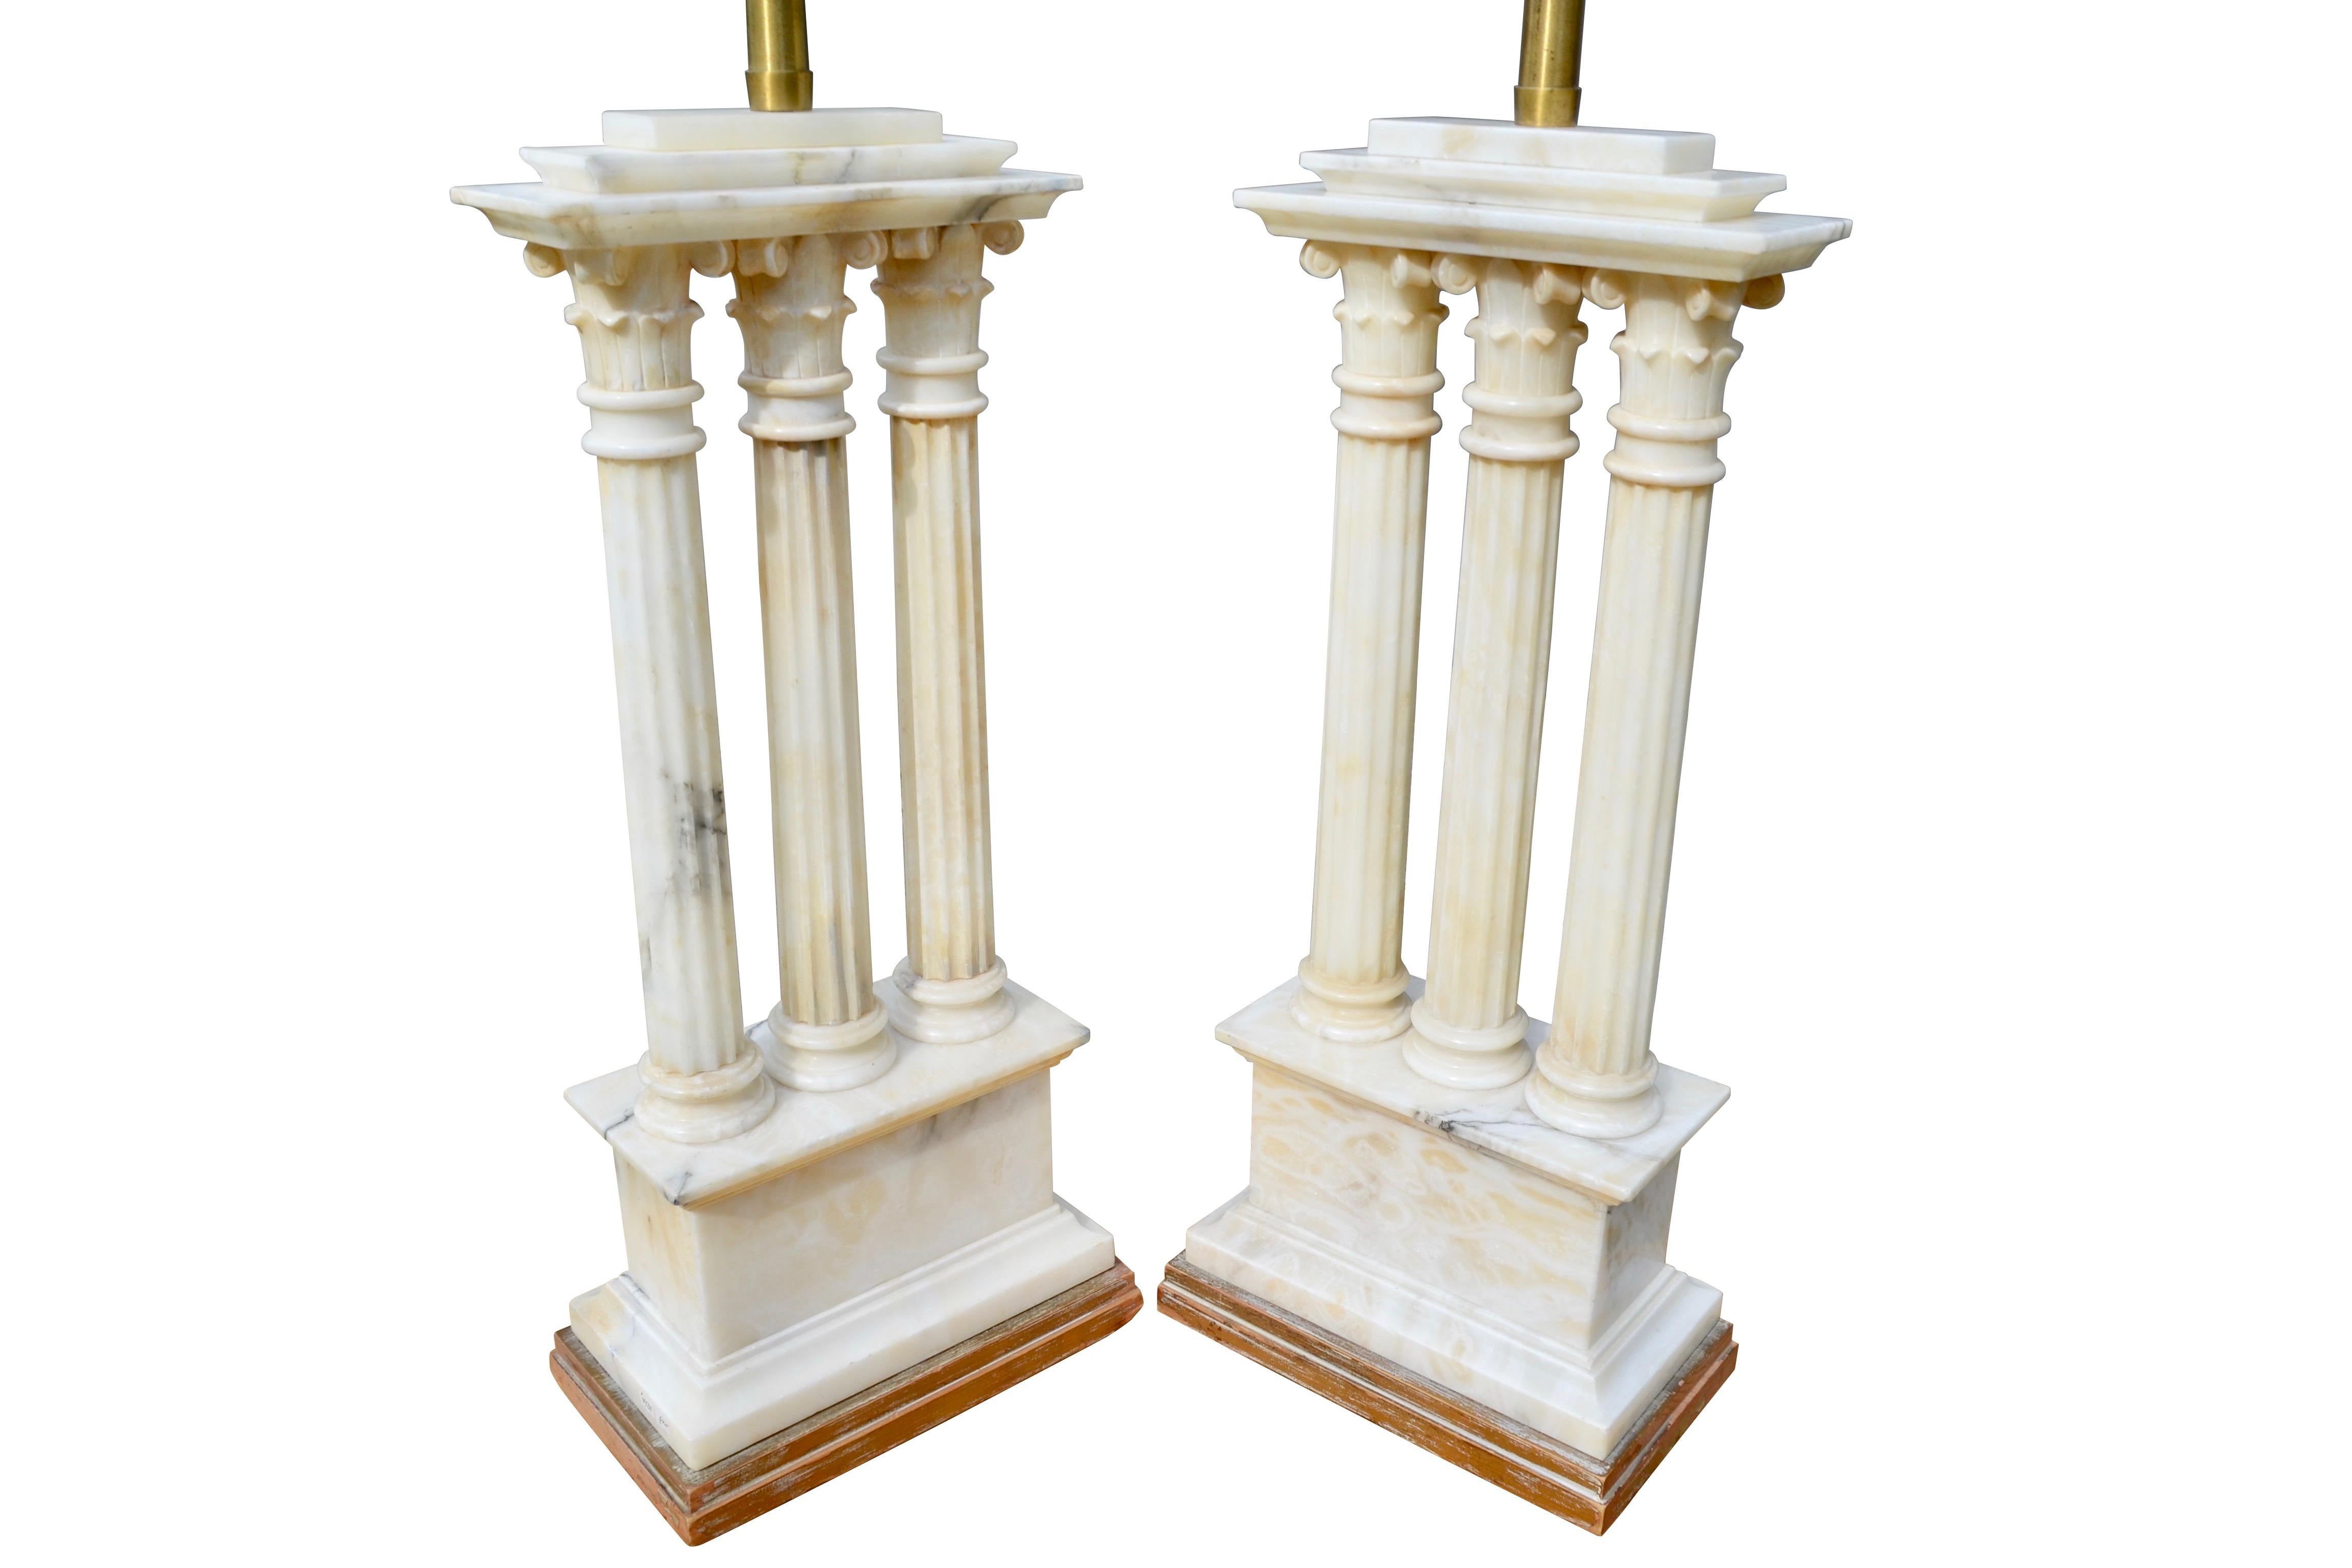 Carved White Alabaster Lamps Modelled After Roman Temple Ruins In Good Condition For Sale In Vancouver, British Columbia